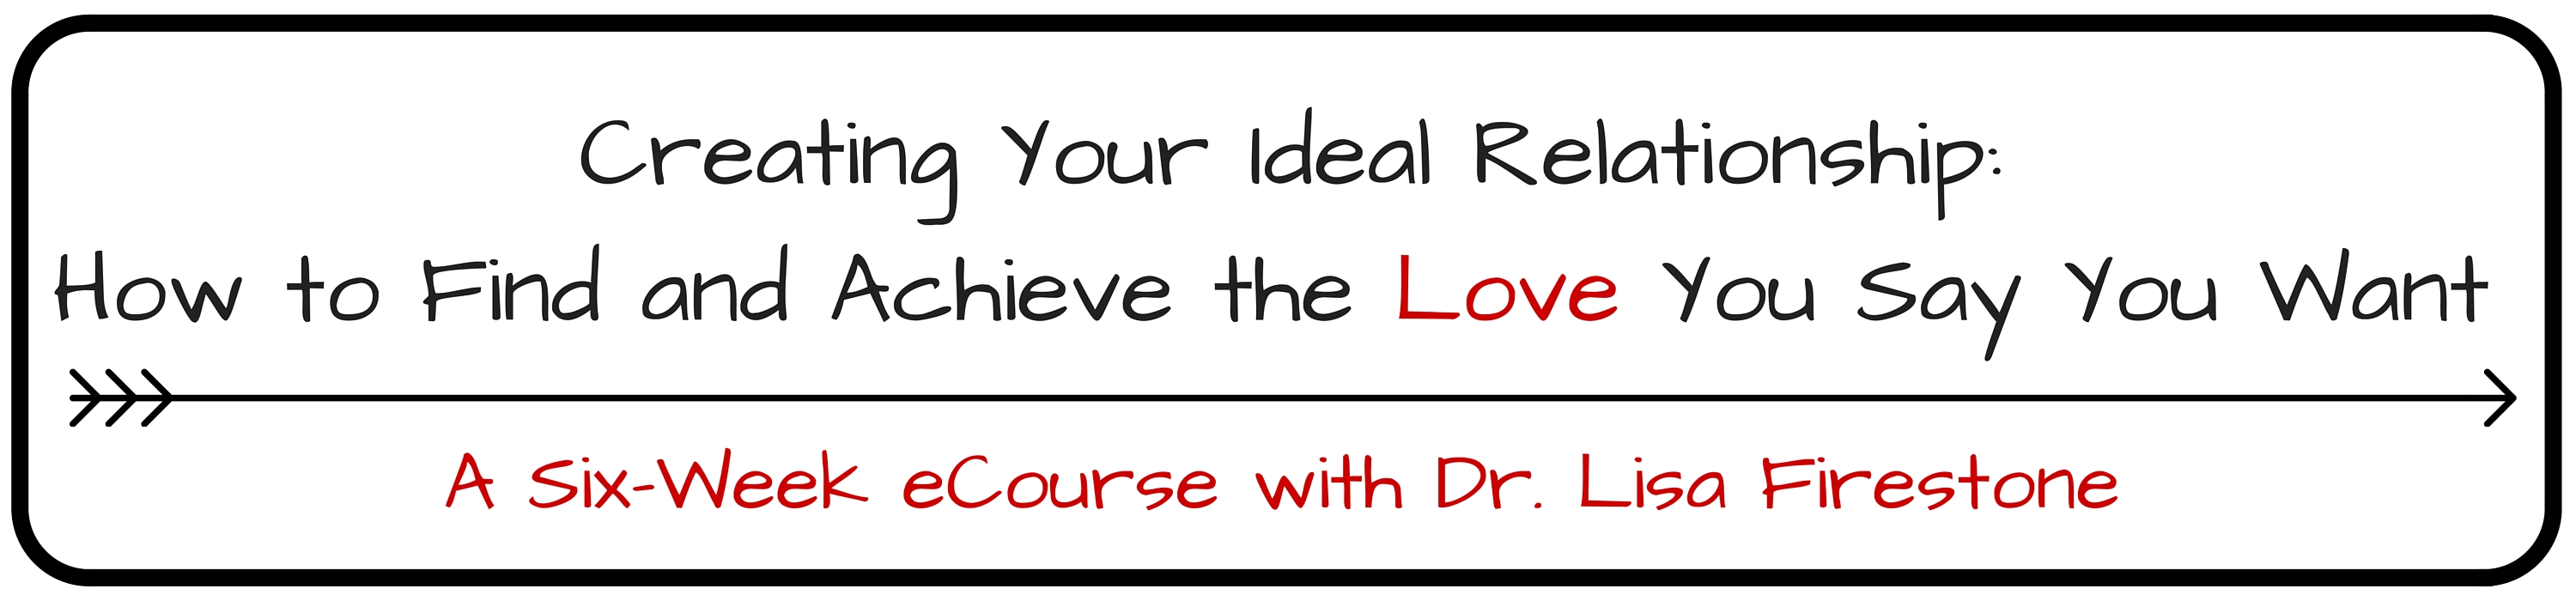 Creating Your Ideal Relationship-How to Find and Achieve the Love You Say You Want